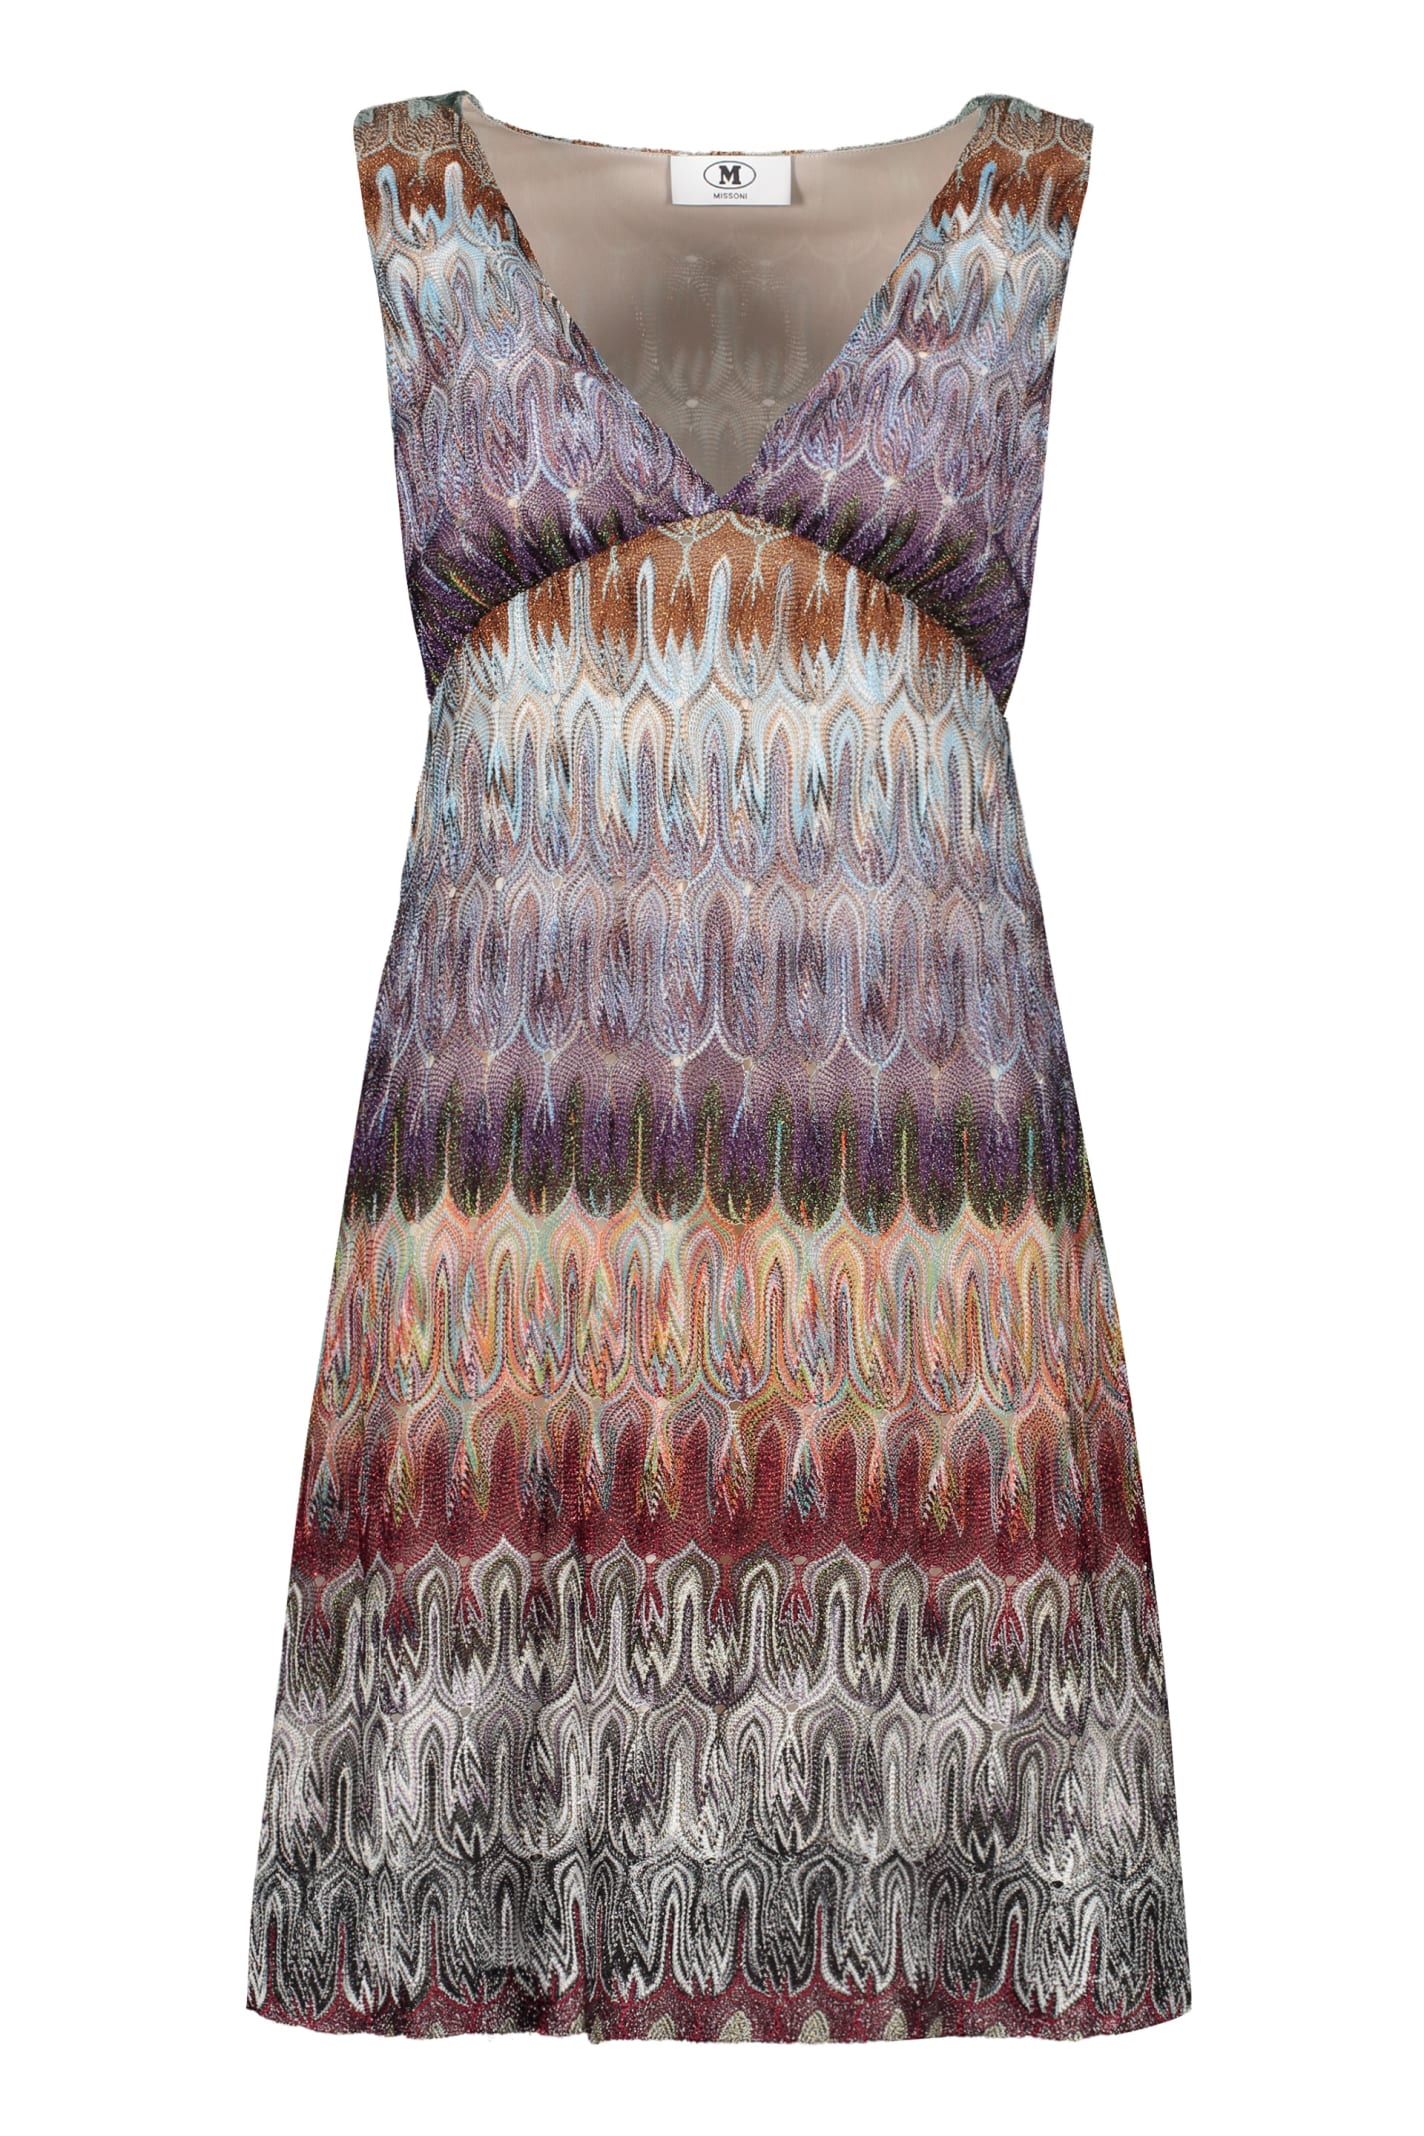 Missoni Abstract Motif Knitted Dress In Multicolor